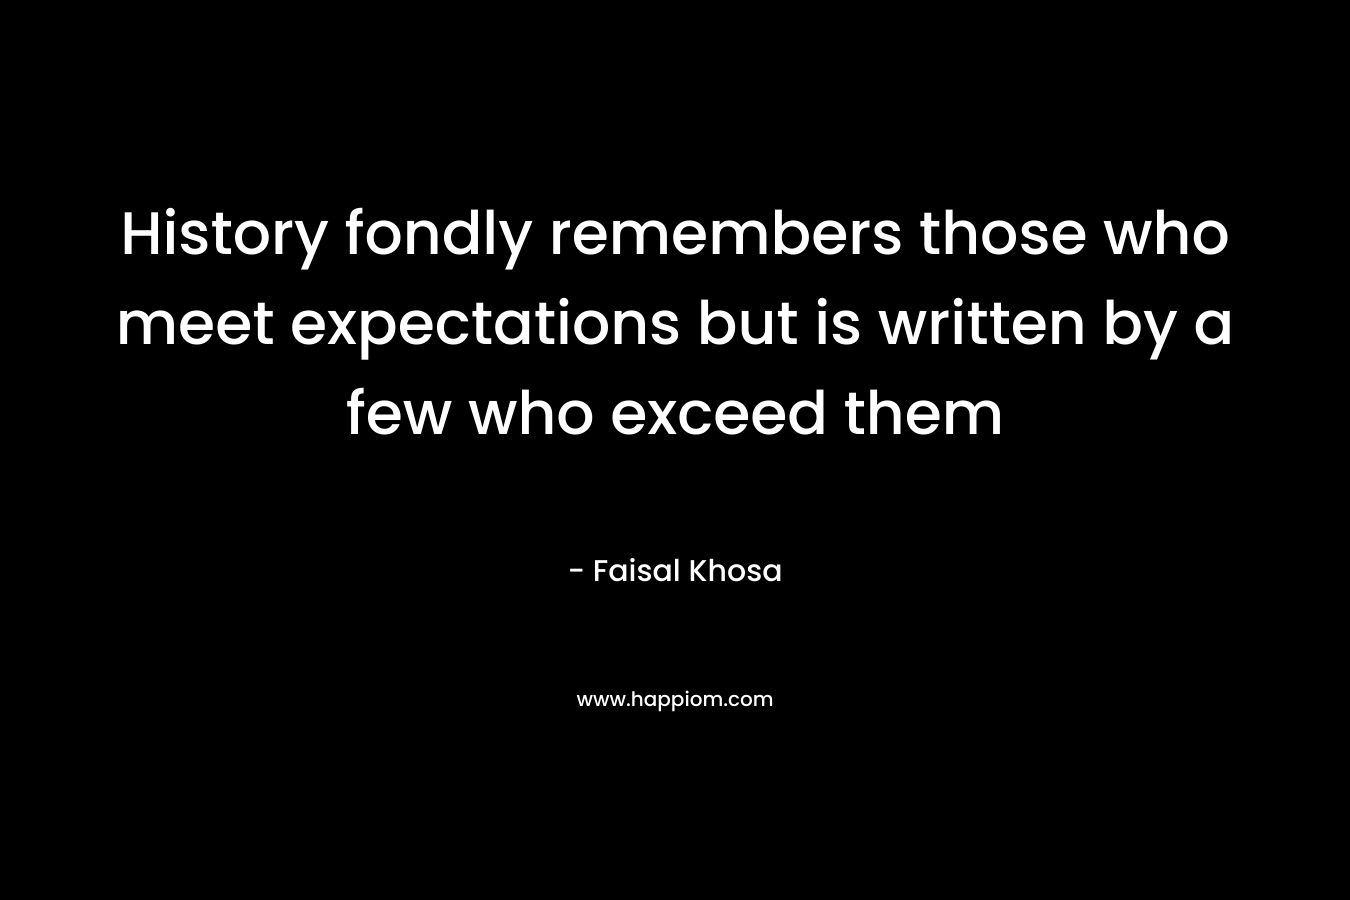 History fondly remembers those who meet expectations but is written by a few who exceed them – Faisal Khosa